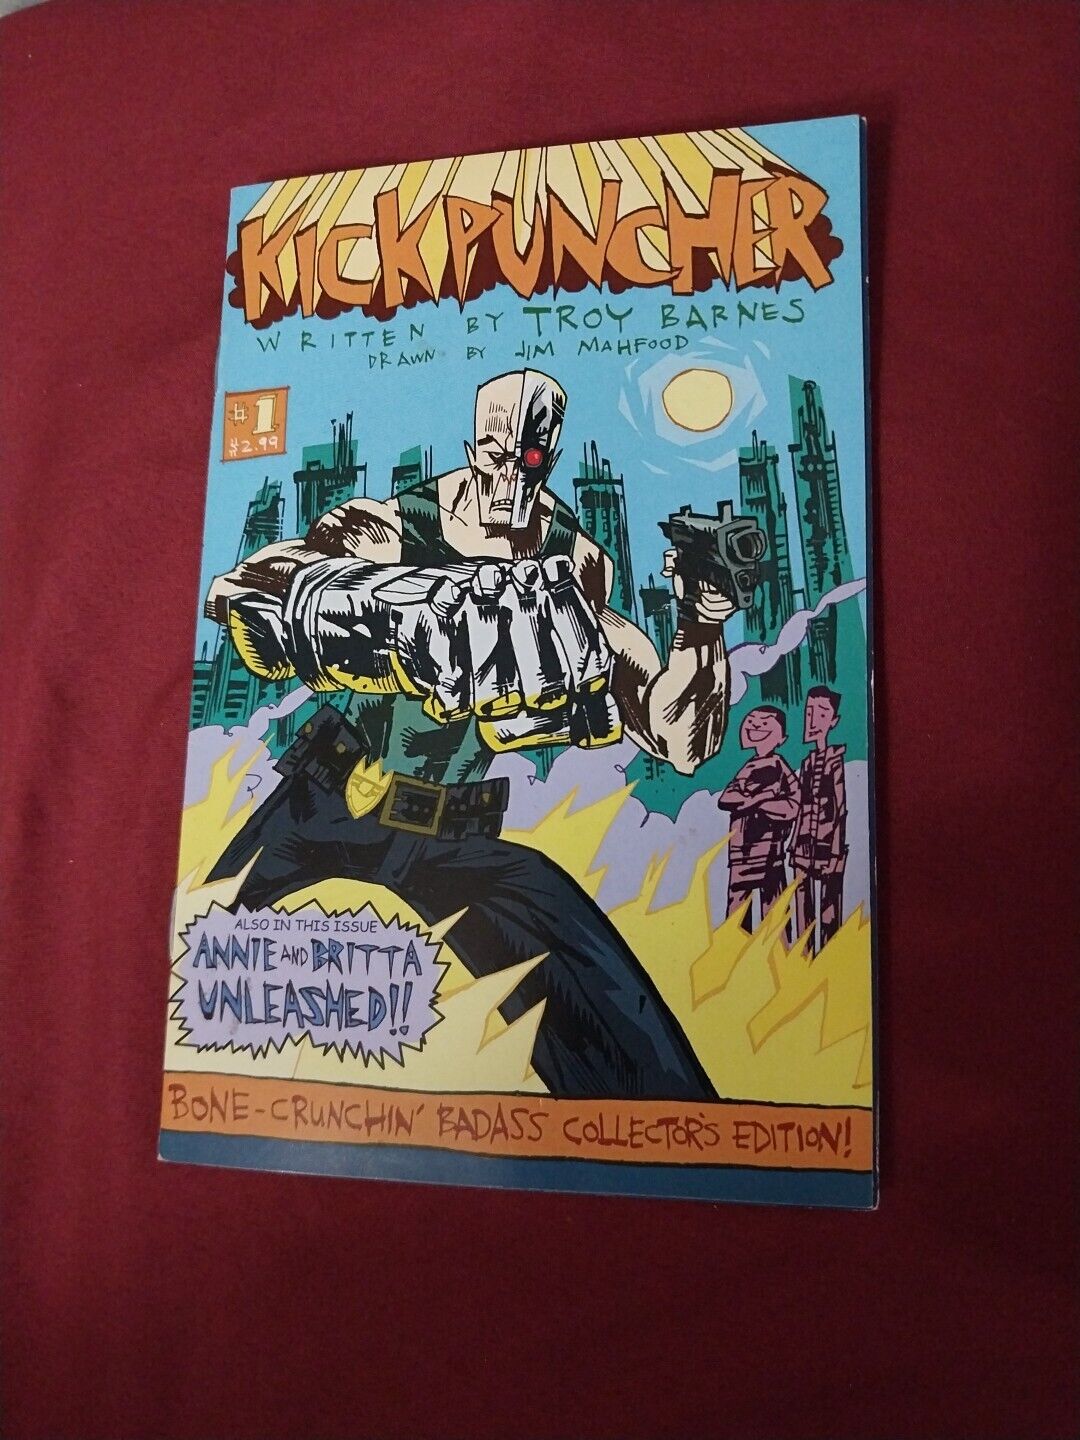 Kickpuncher 1 Community TV Show Series Troy & Abed Mini COMIC BOOK Donald Glover